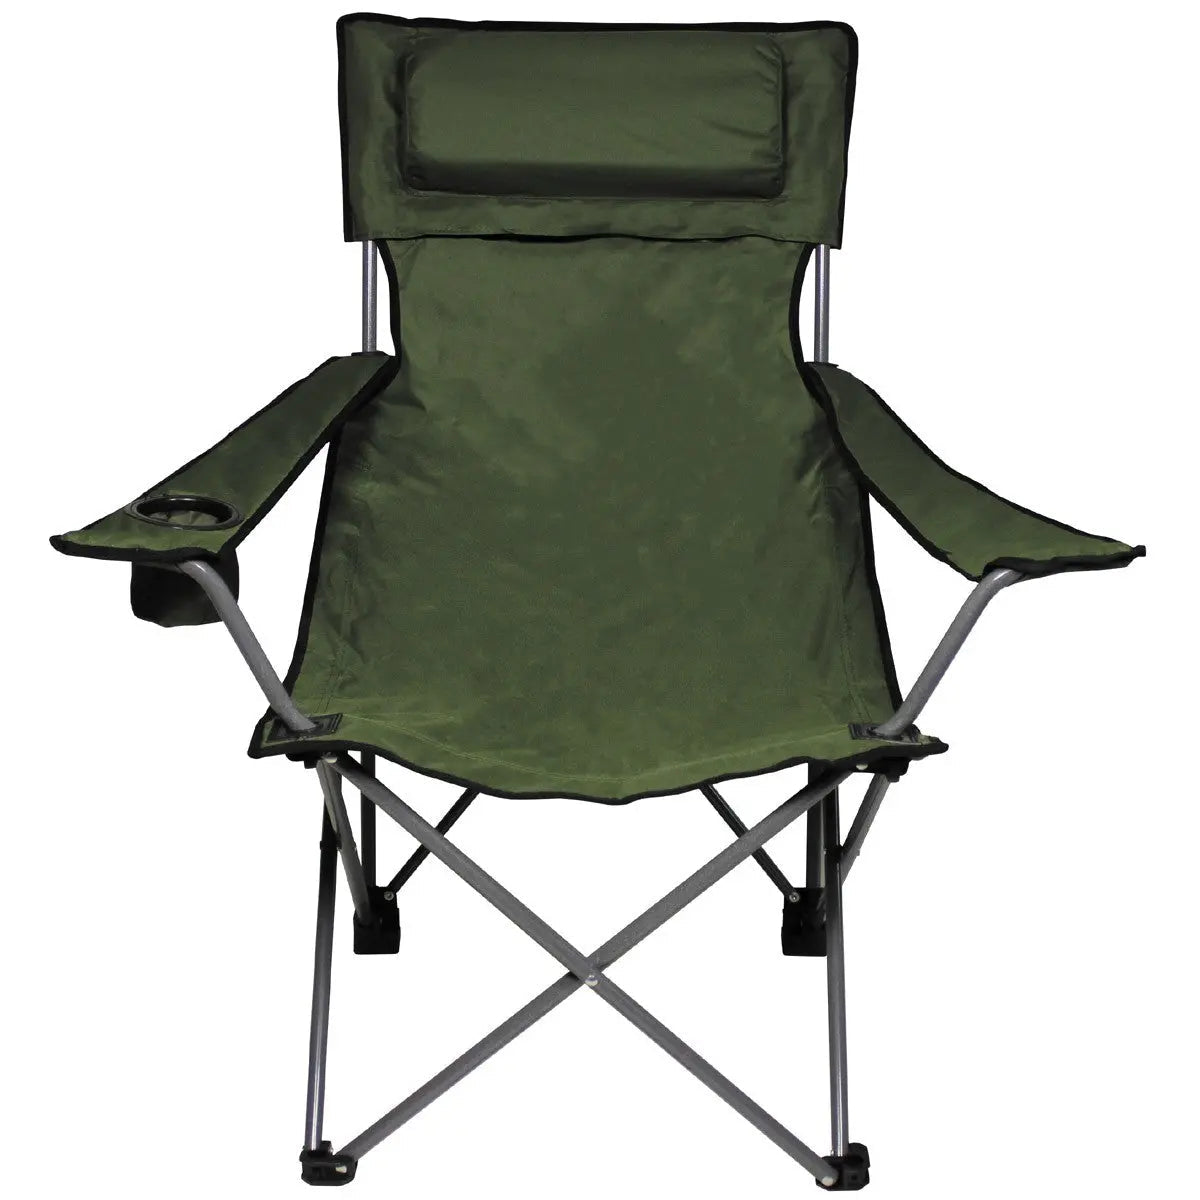 Folding chair, "Deluxe", olive